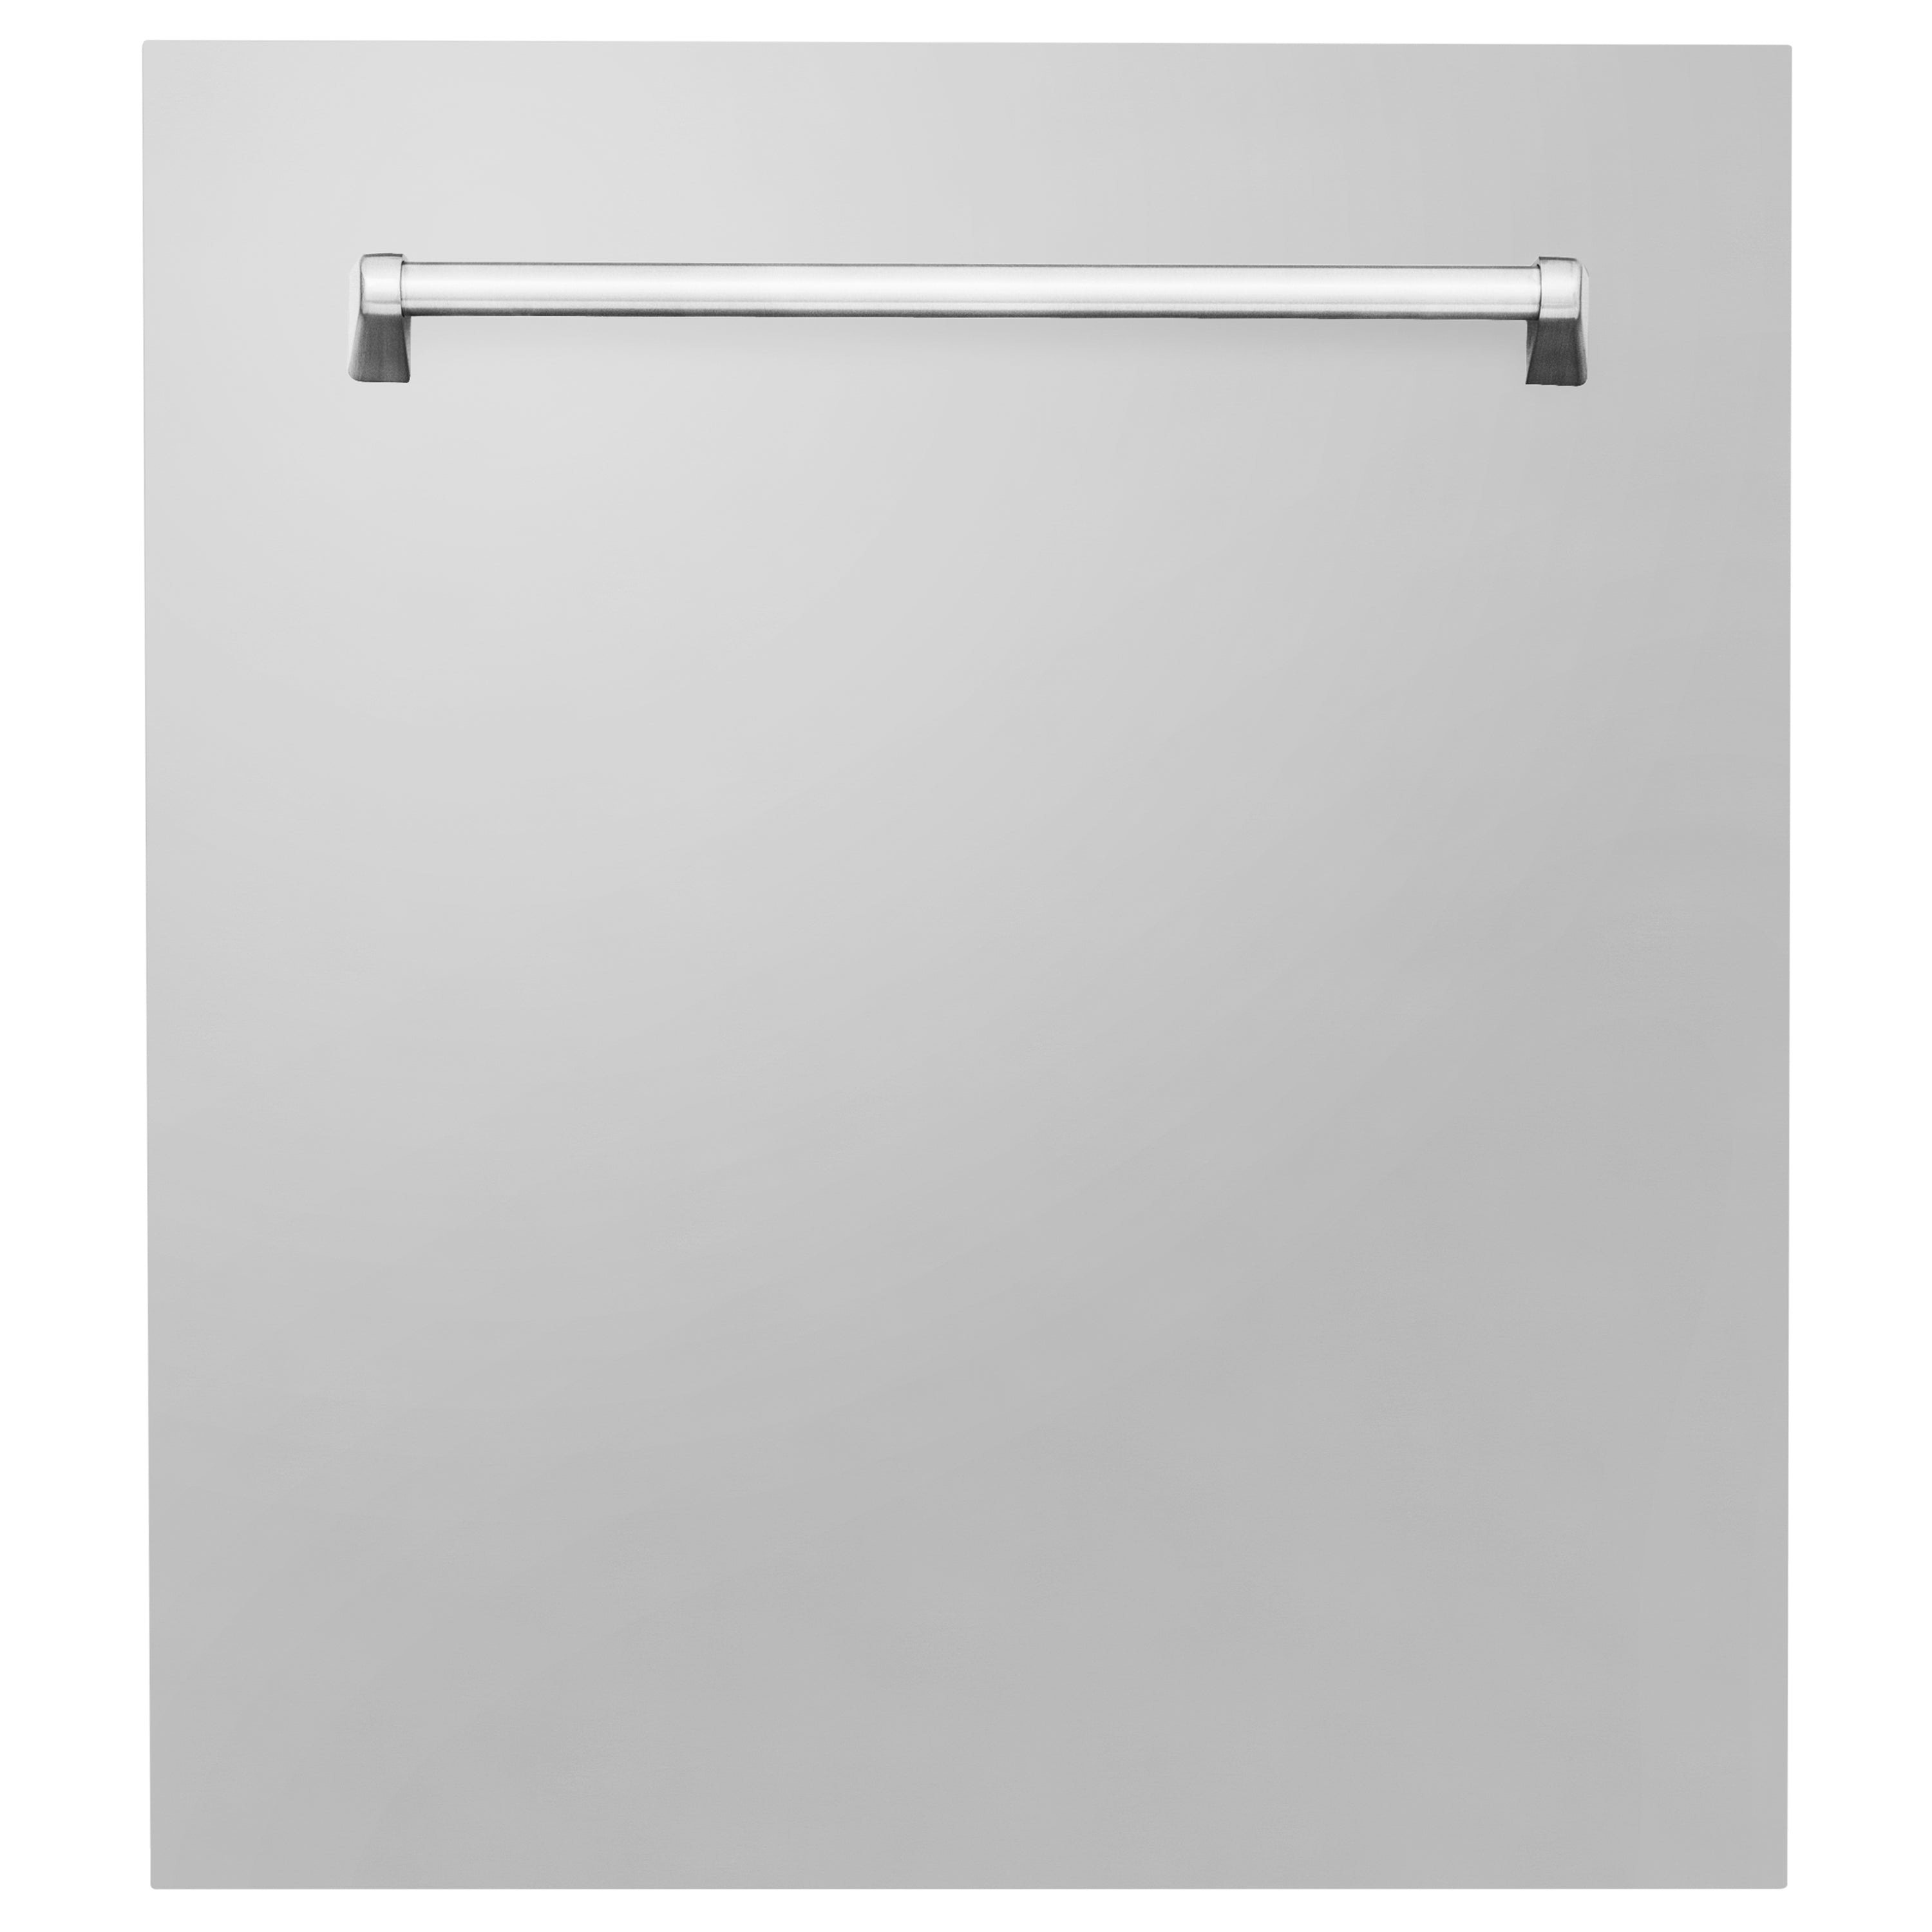 ZLINE 24" Tallac Tall Tub Dishwasher Panel with Traditional Handle (DPV-24)